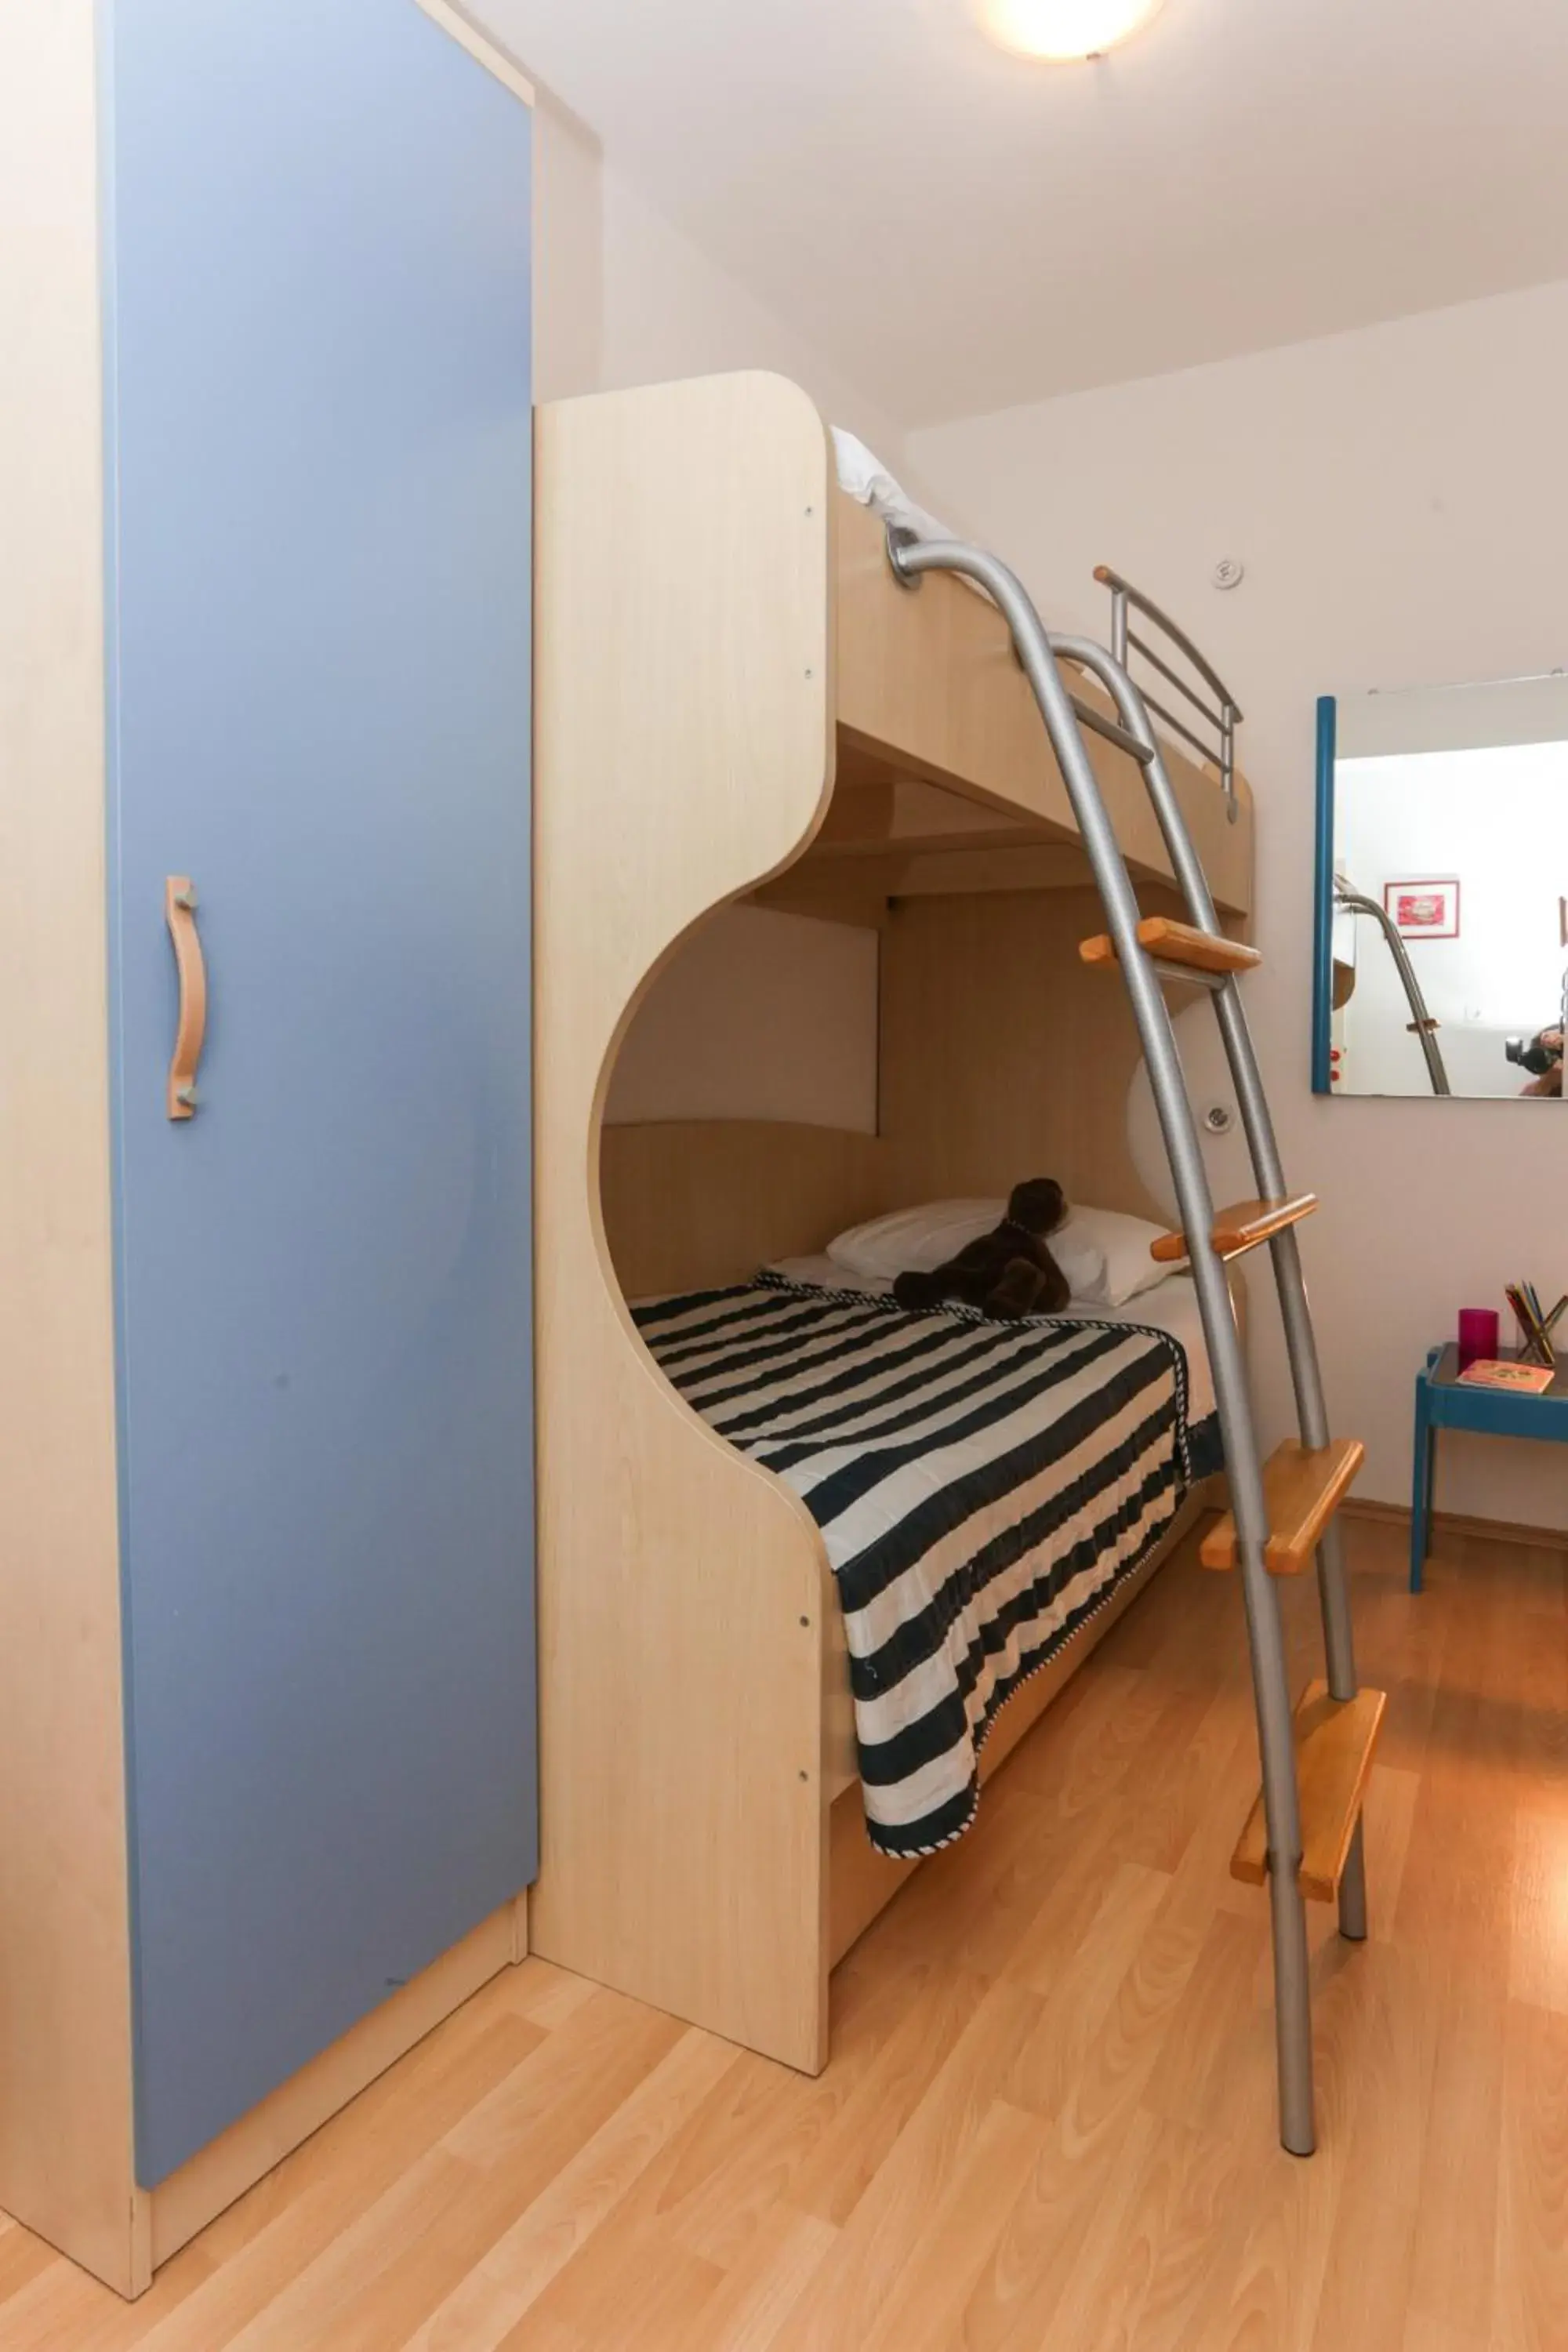 Bunk Bed in K-apartments